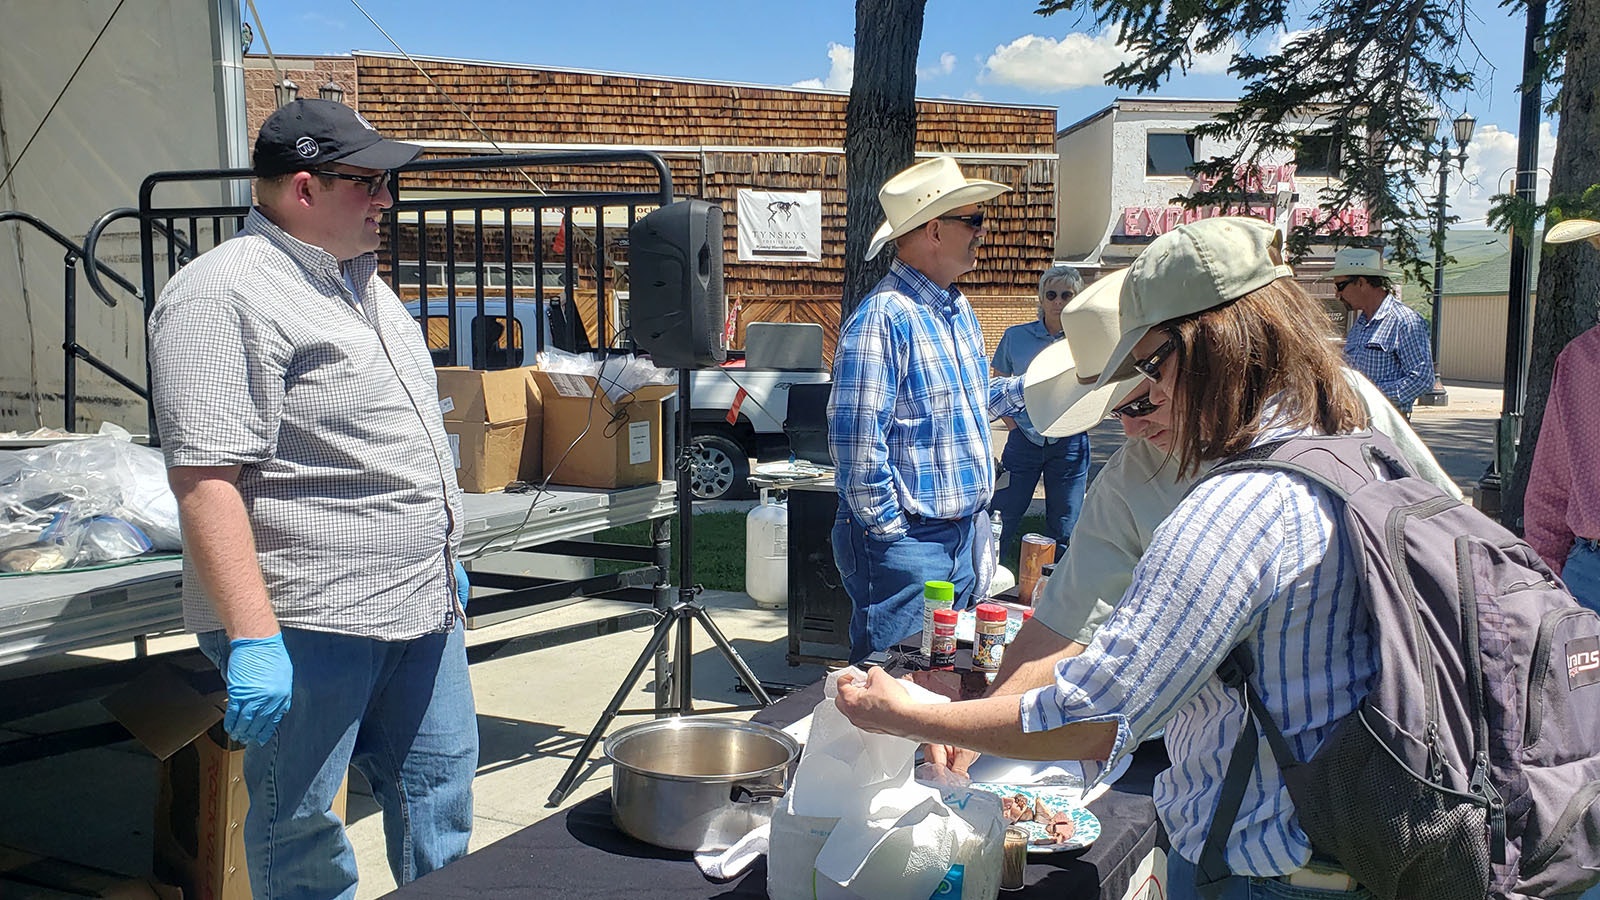 Participants line up to try lamb prepared several different ways during a recent cooking demonstration in Kemmerer.